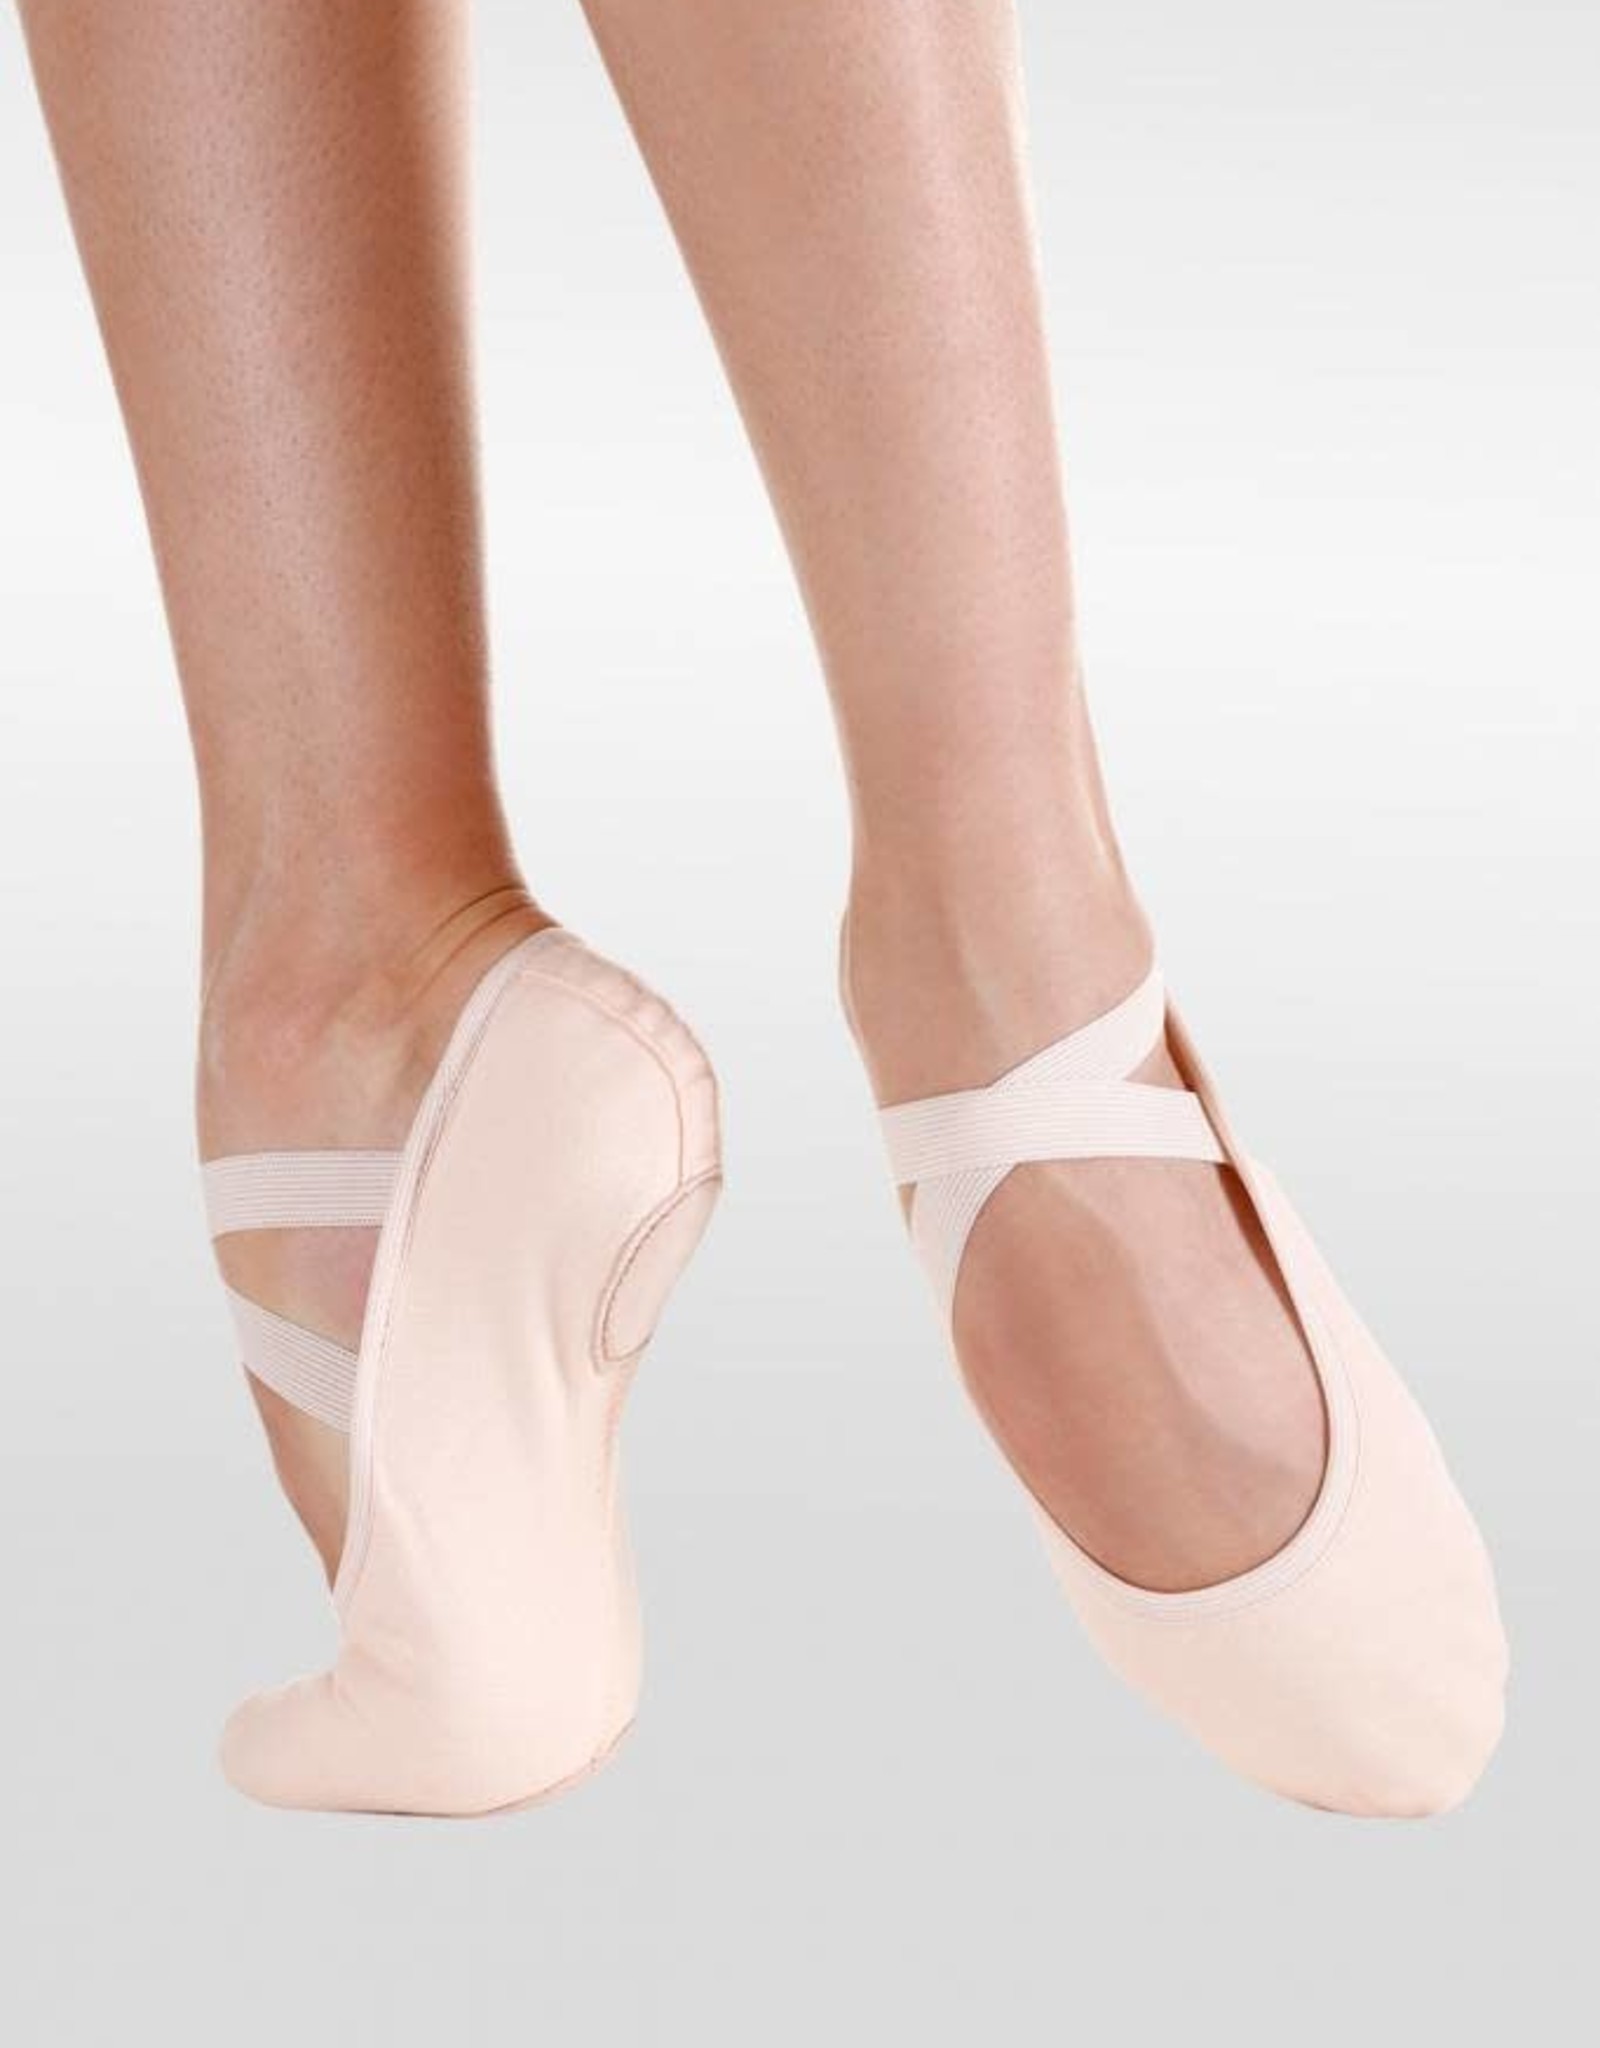 92 White Danca dance shoes Combine with Best Outfit